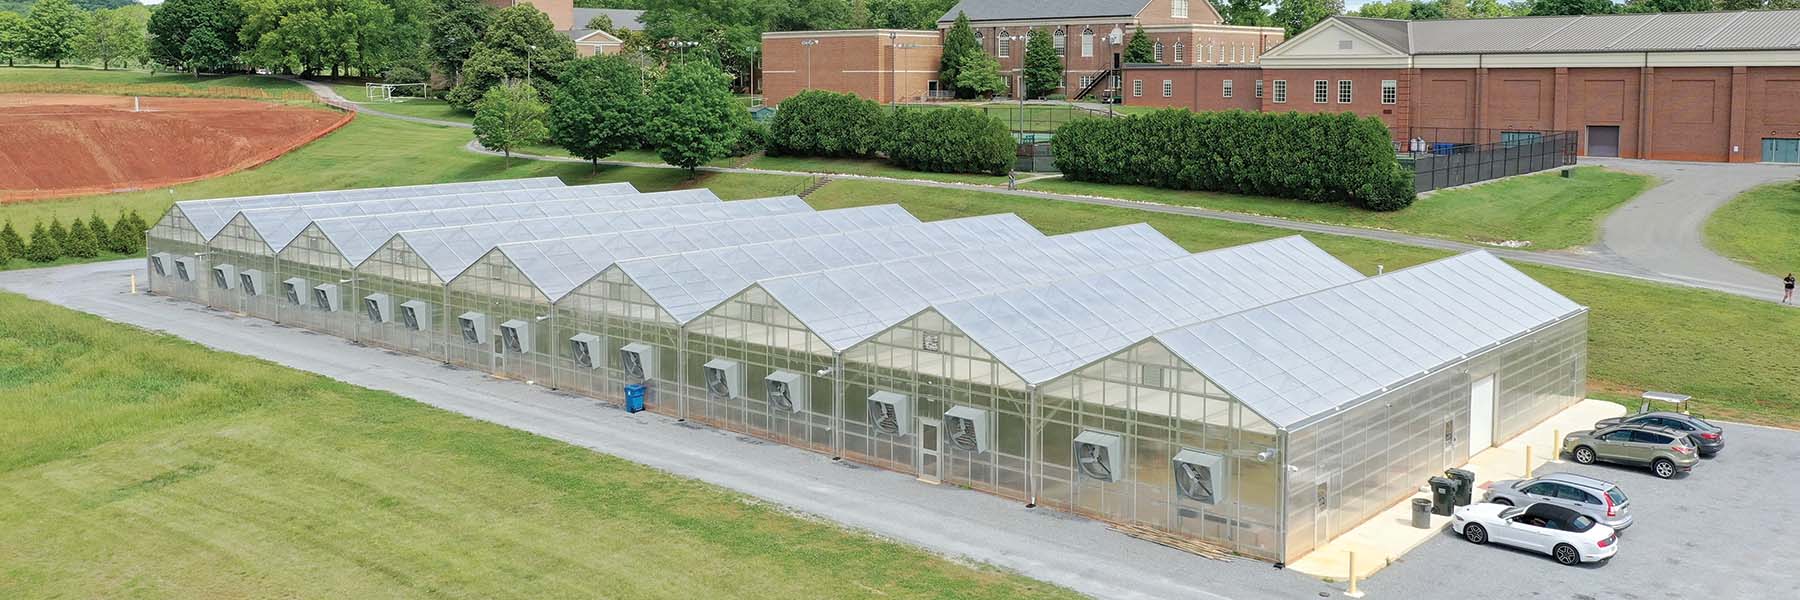 commercial cannabis greenhouses